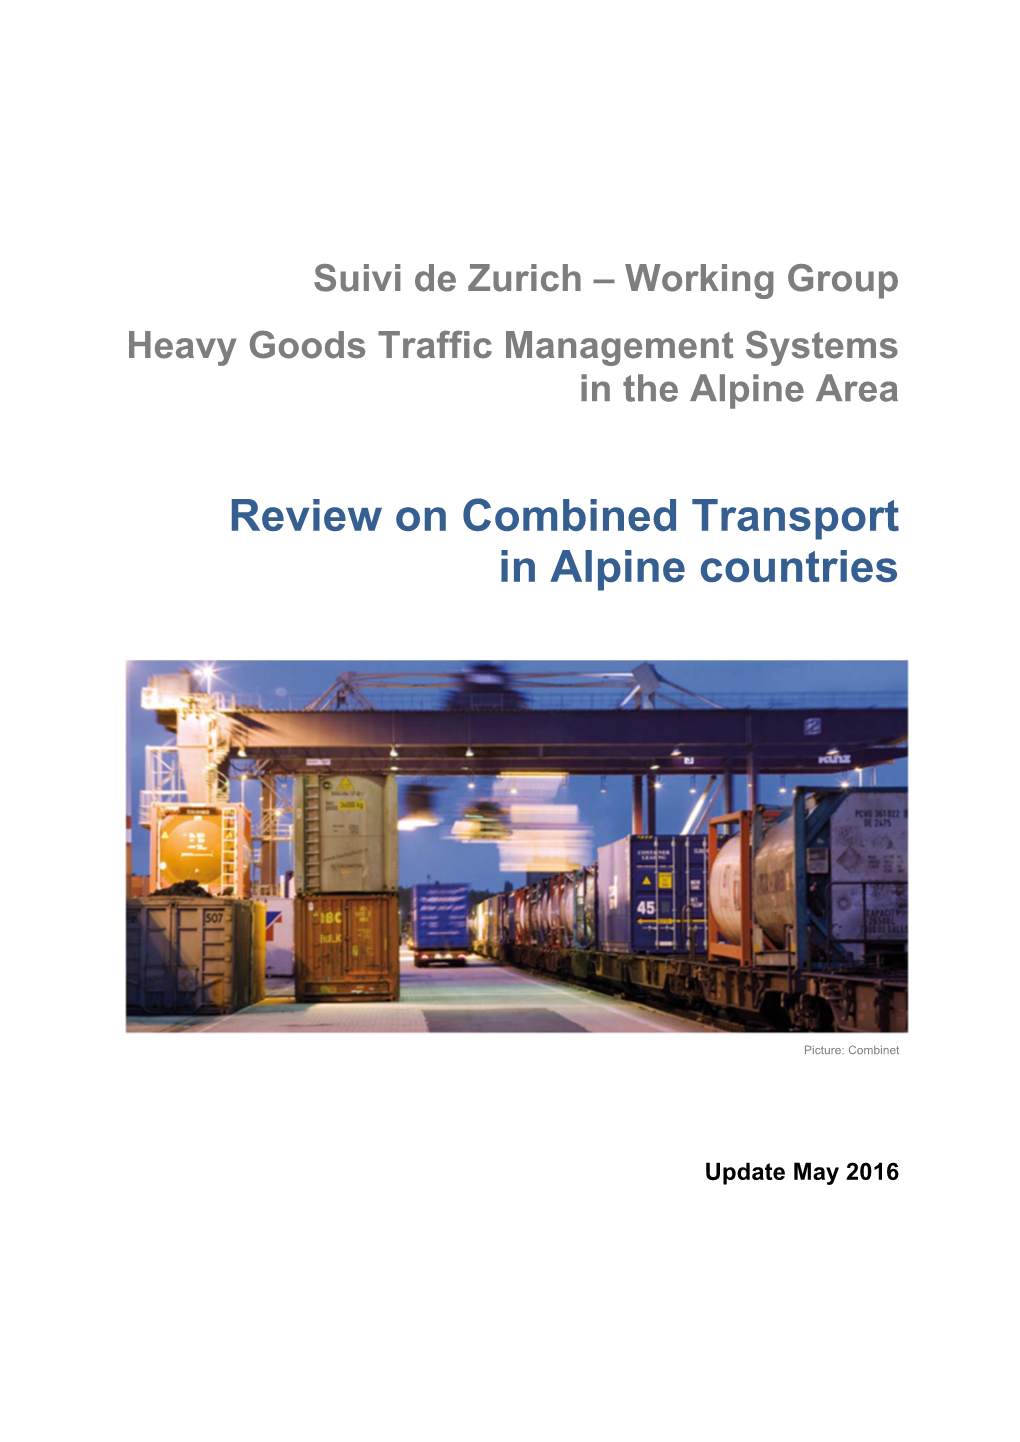 Review on Combined Transport in Alpine Countries